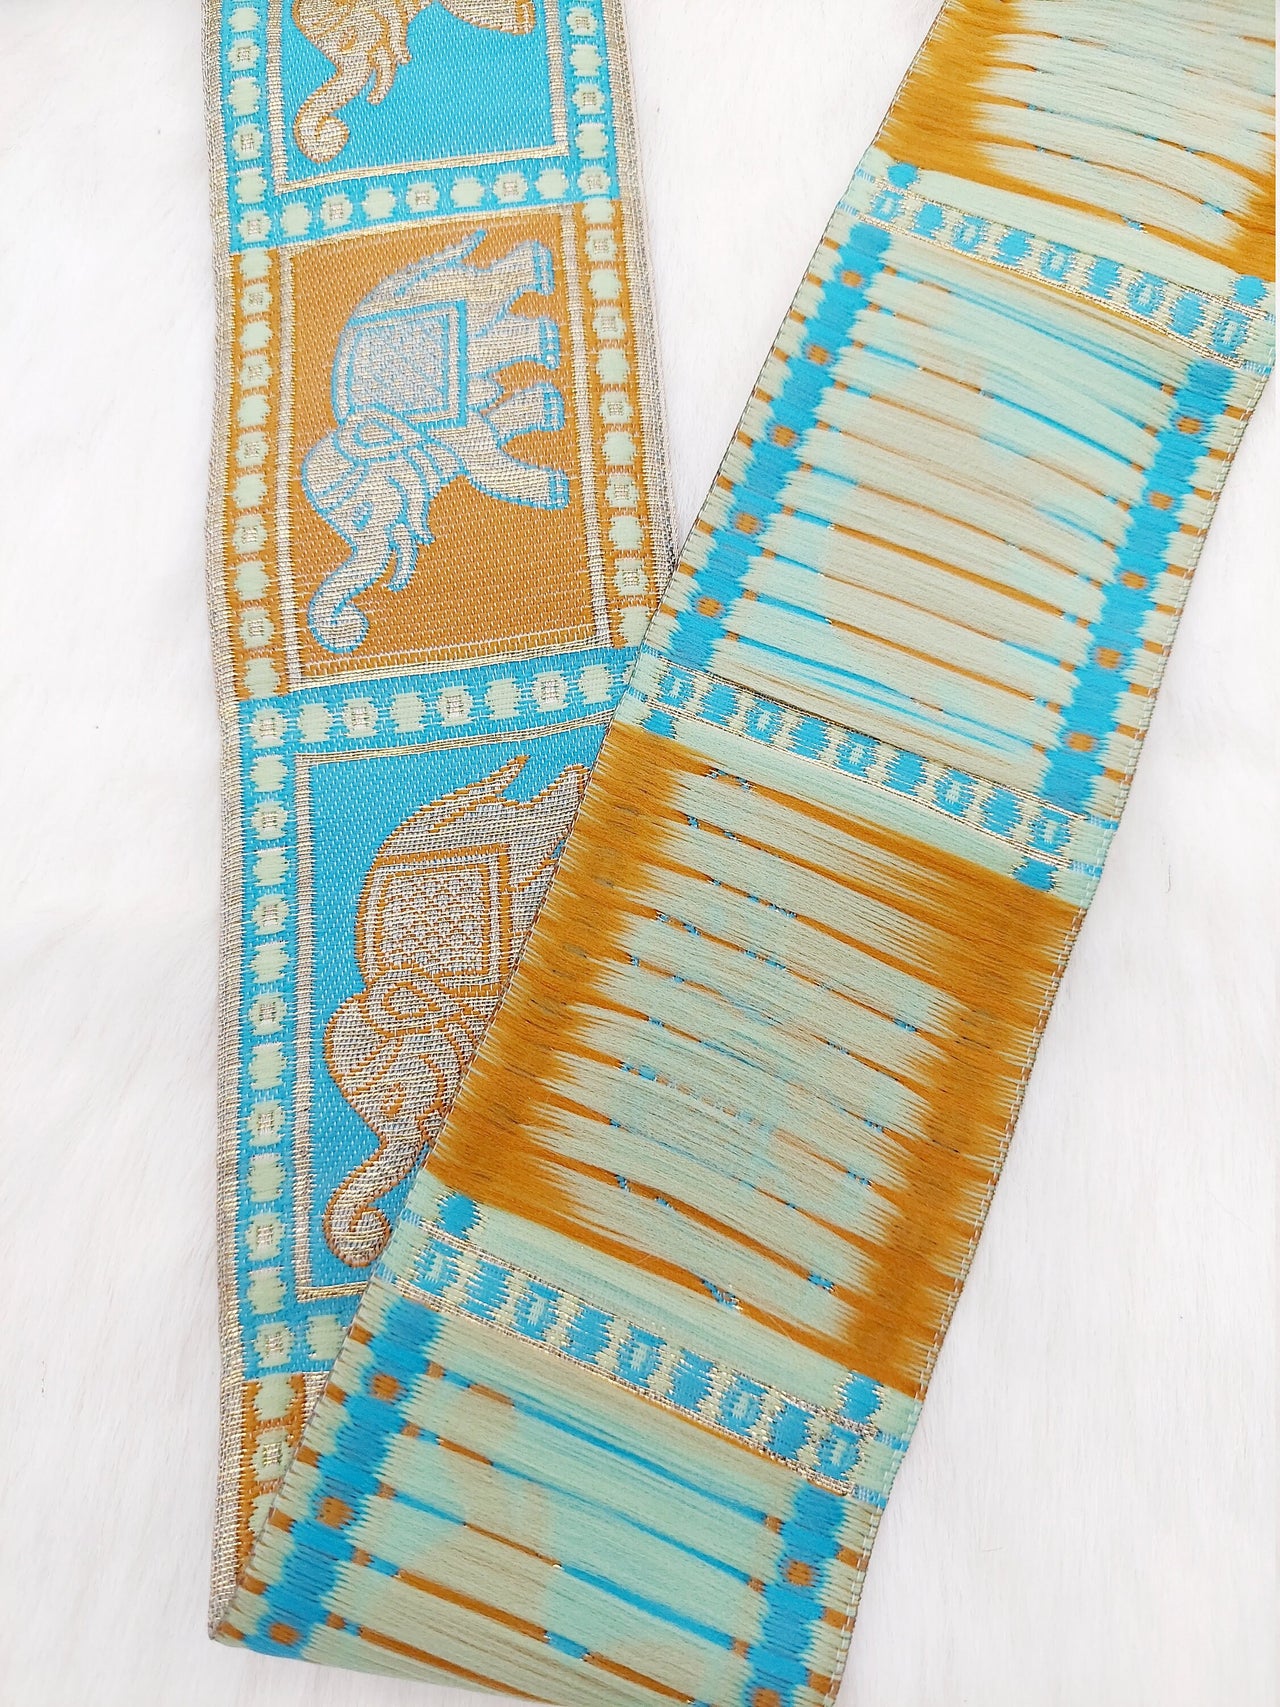 Beige Shimmer Jacquard Brocade Saree Border Trim with Elephant Woven in Brown and Blue, 9 Yards